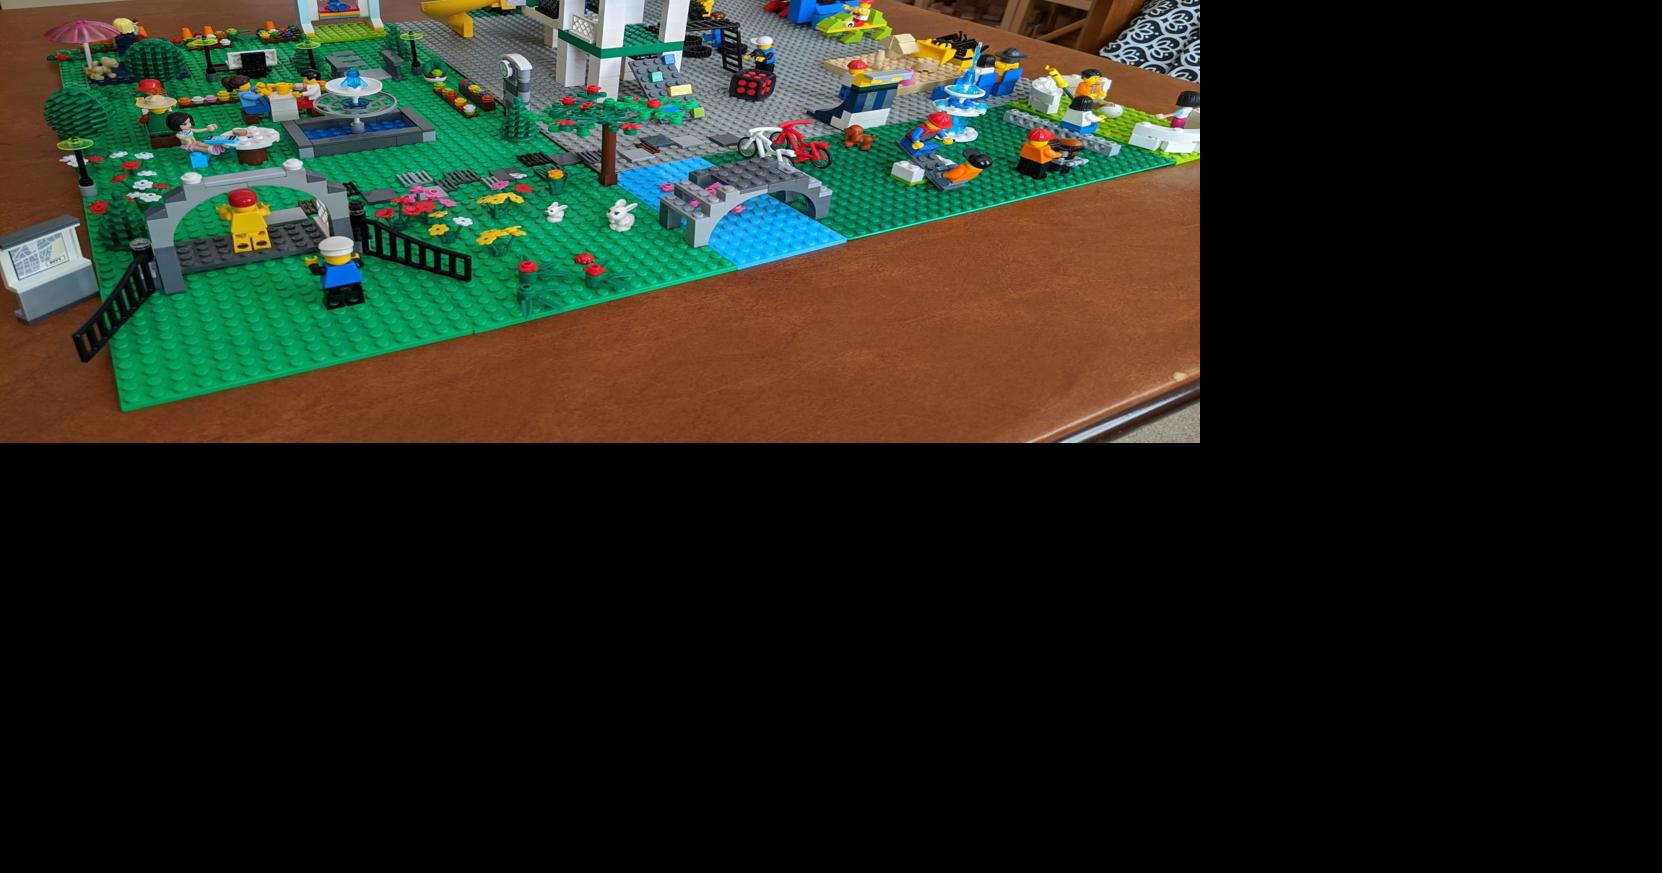 LEGO CITY BRICK GAMES 6 -12 YEARS OLD - POLICE STATION - CONF. AS PHOTO